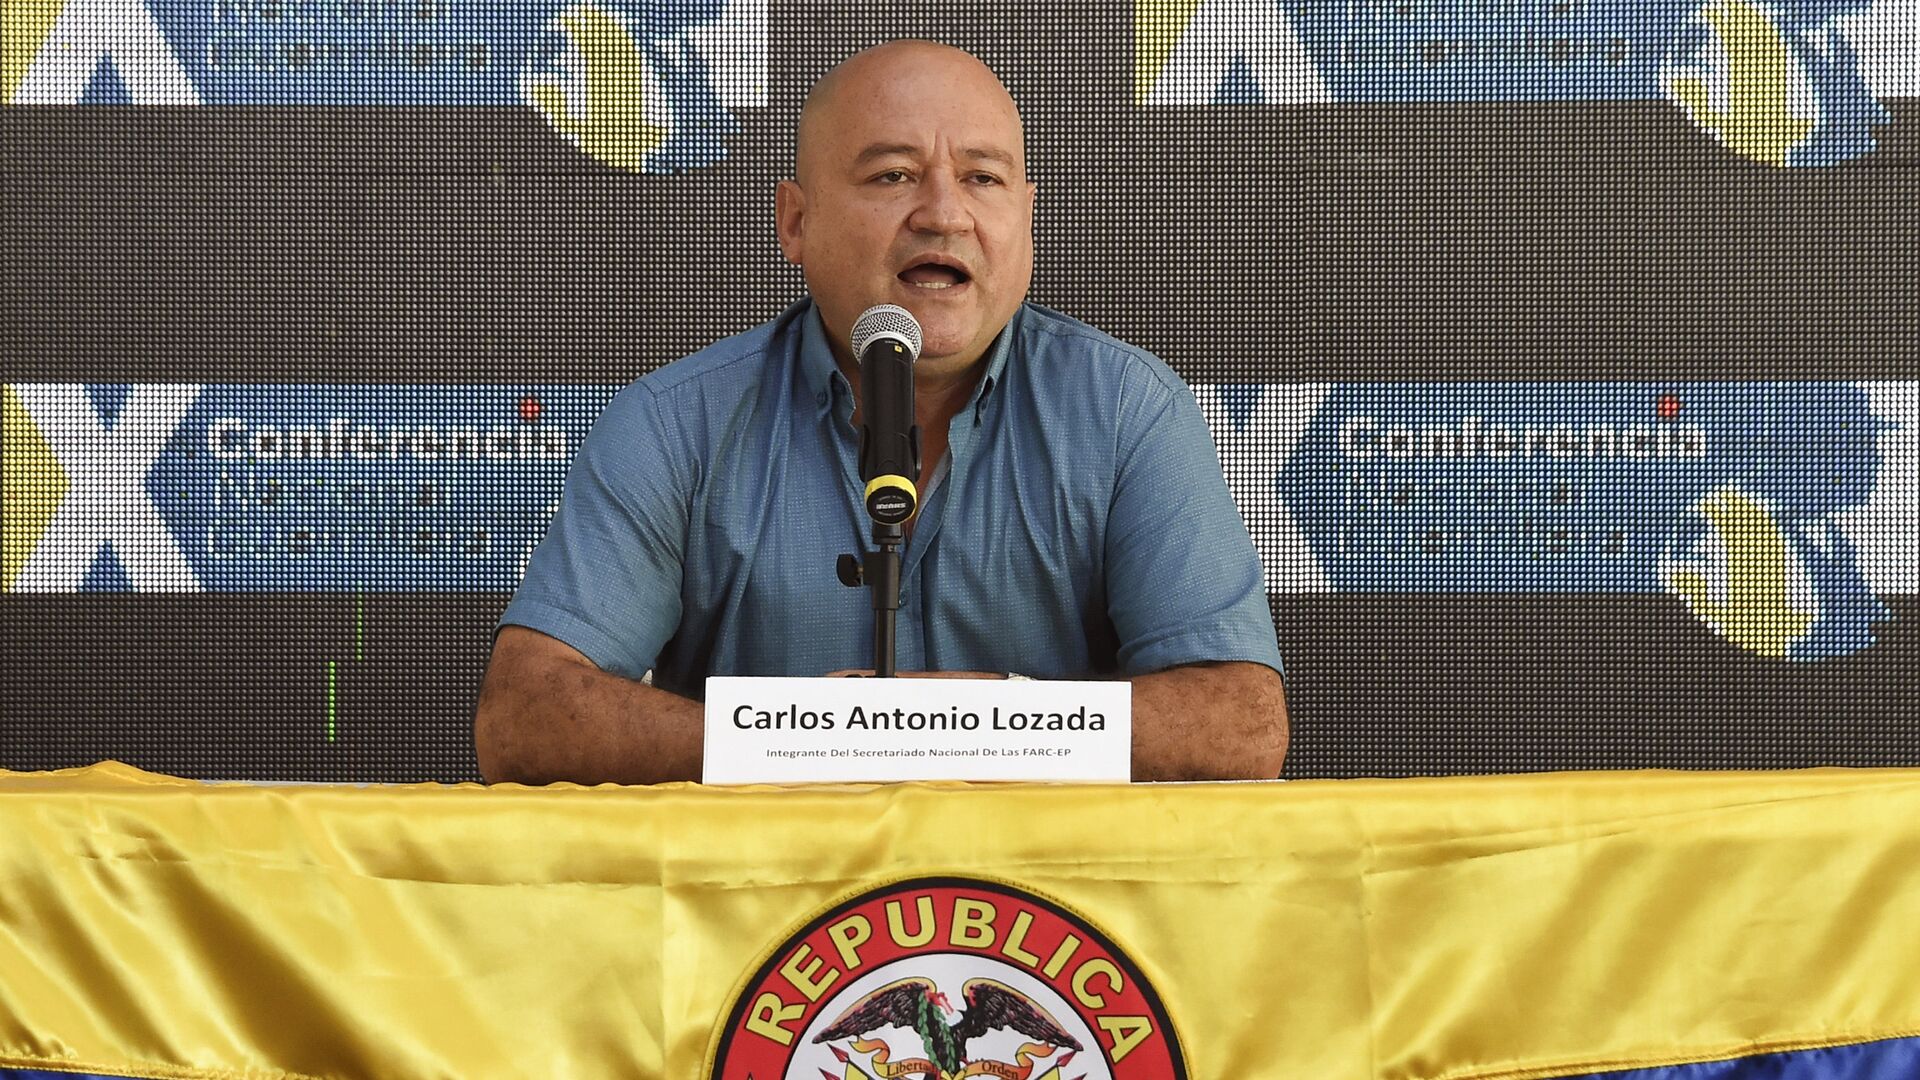 Commander Carlos Antonio Lozada, member of the direction of the Revolutionary Armed Forces of Colombia (FARC), speaks during the 10th National Guerrilla Conference in Llanos del Yari, Caqueta department, Colombia, on September - Sputnik Mundo, 1920, 12.08.2021